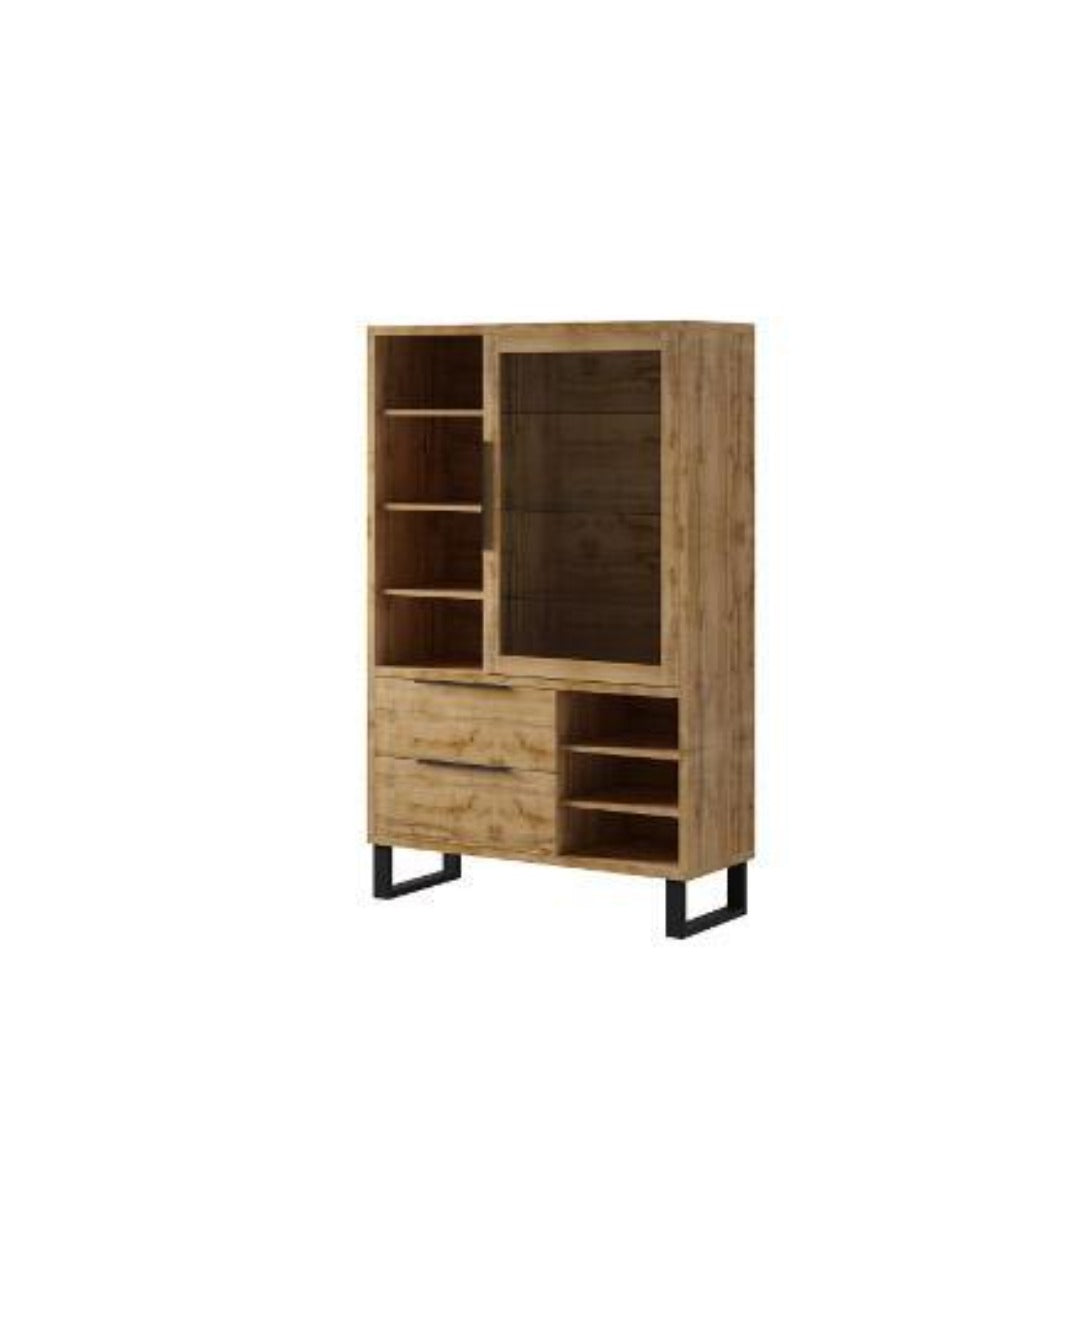 Halle 13 Tall Display Cabinet - £491.4 - Living Room Display Cabinet 